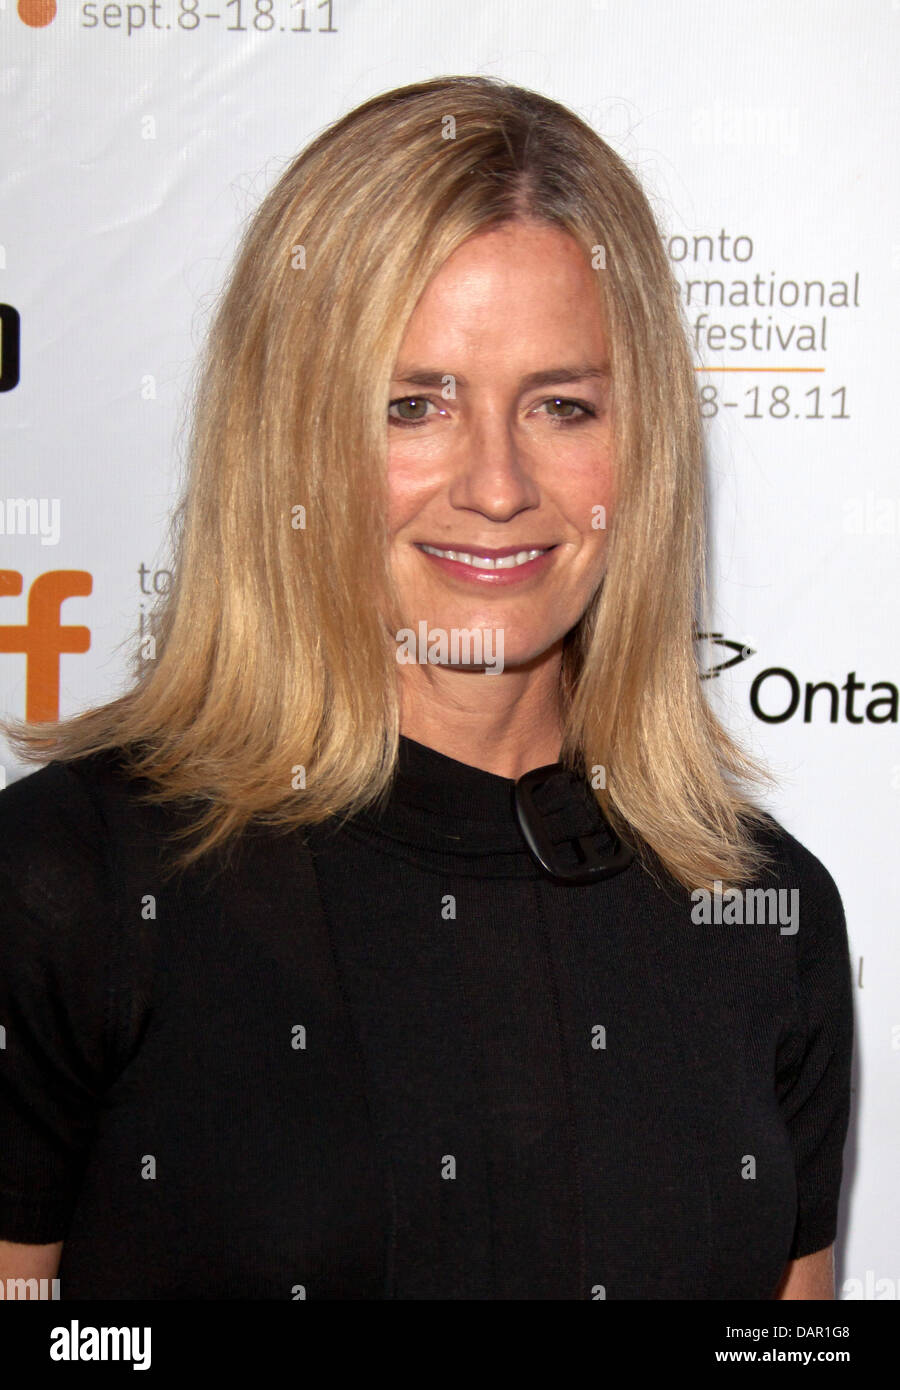 US actress Elisabeth Shue arrives at the premiere of the movie 'From The Sky Down' at the Toronto International Film Festival at Roy Thomson Hall in Toronto, Canada, 8 September 2011. Photo: Hubert Boesl Stock Photo